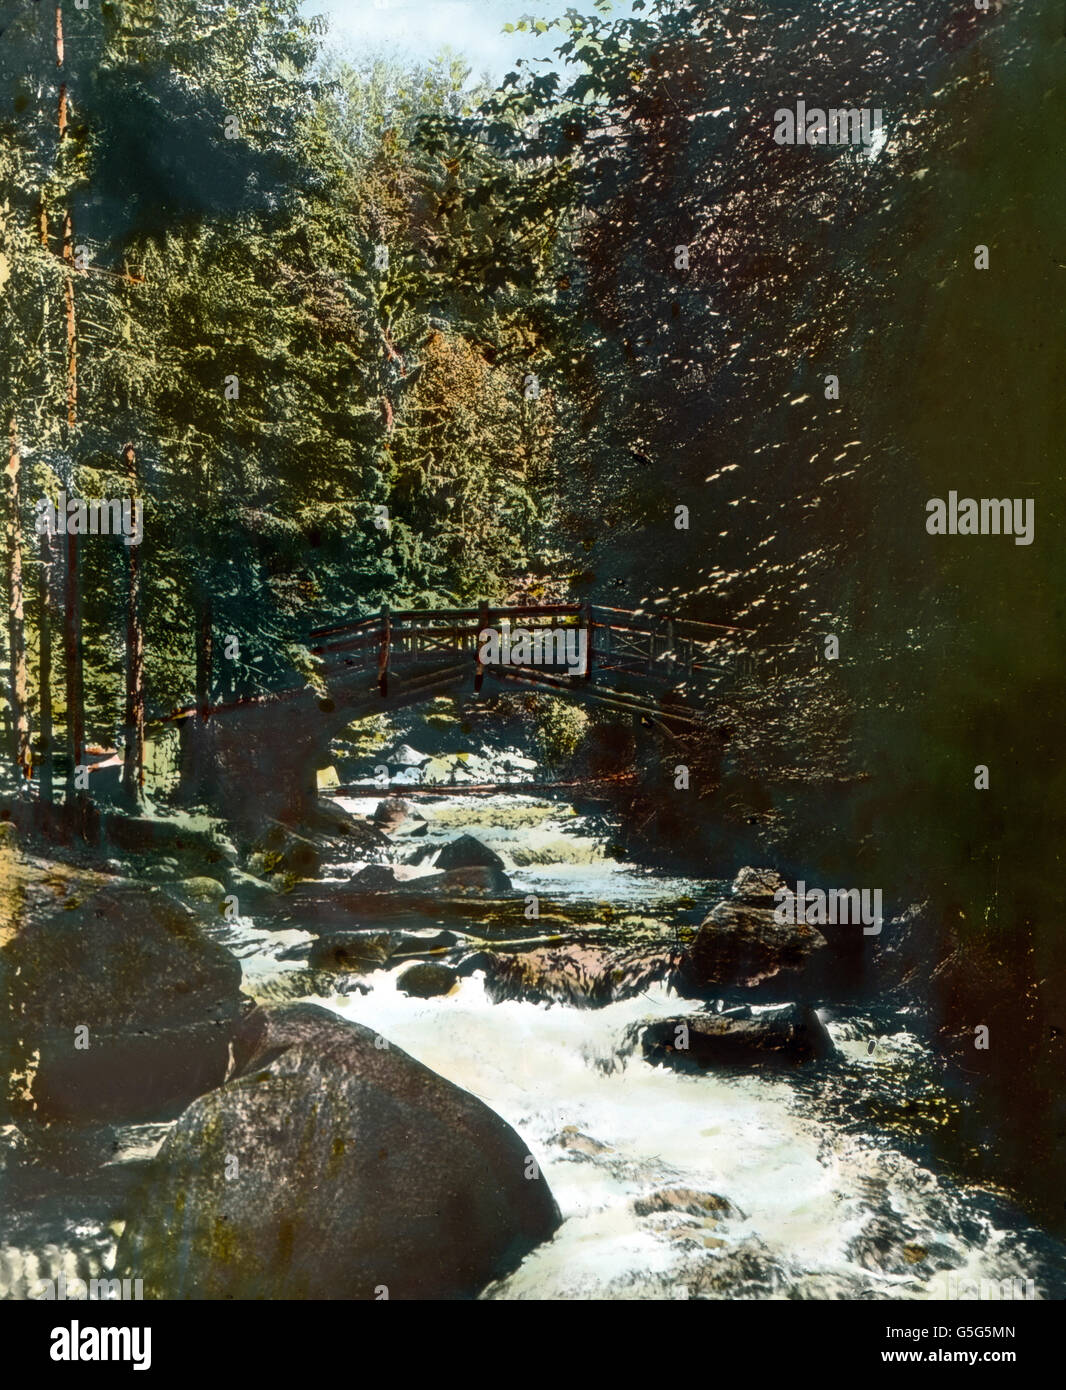 Im Okertal. Inside the Oker valley in the Harz region. Europe, Germany, landscape, mountain range, history, historical, 1910s, 1920s, 20th century, archive, Carl Simon, nature, landscape, creek, river, bridge, wood, forest, trees, flora, fauna, hand coloured glass slide Stock Photo